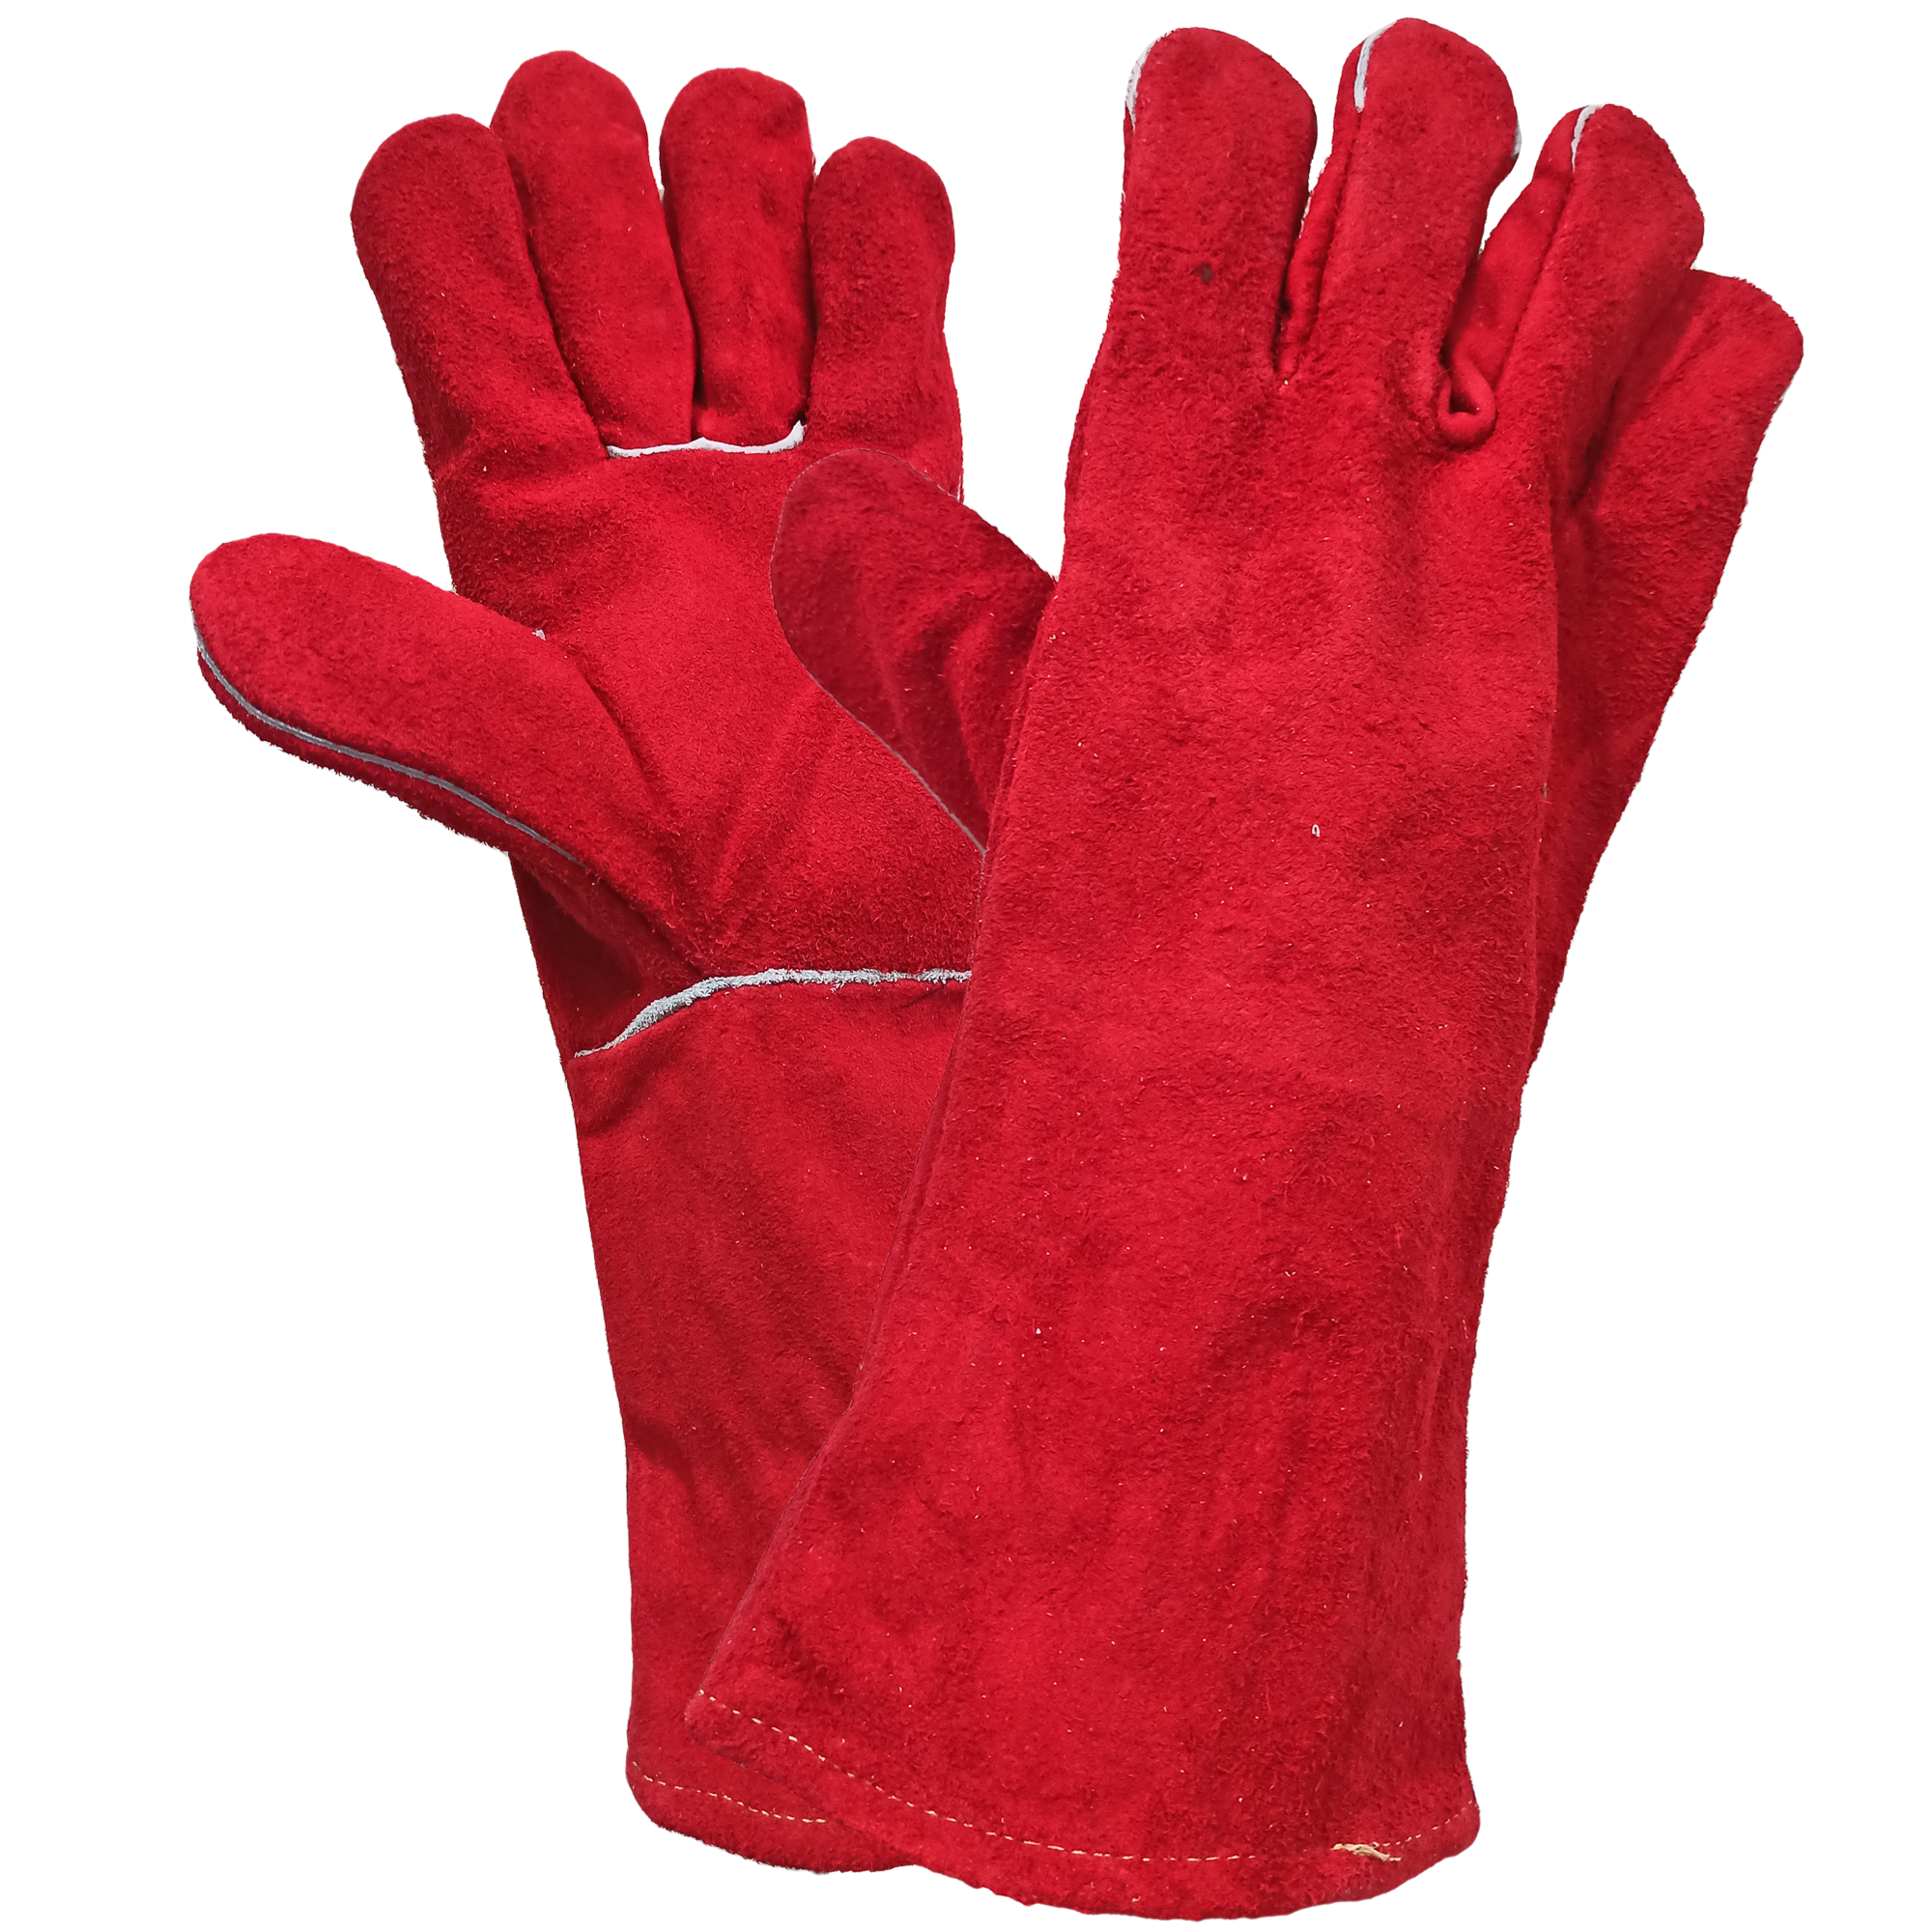 wsrcl-35-welder-gloves-with-red-split-leather